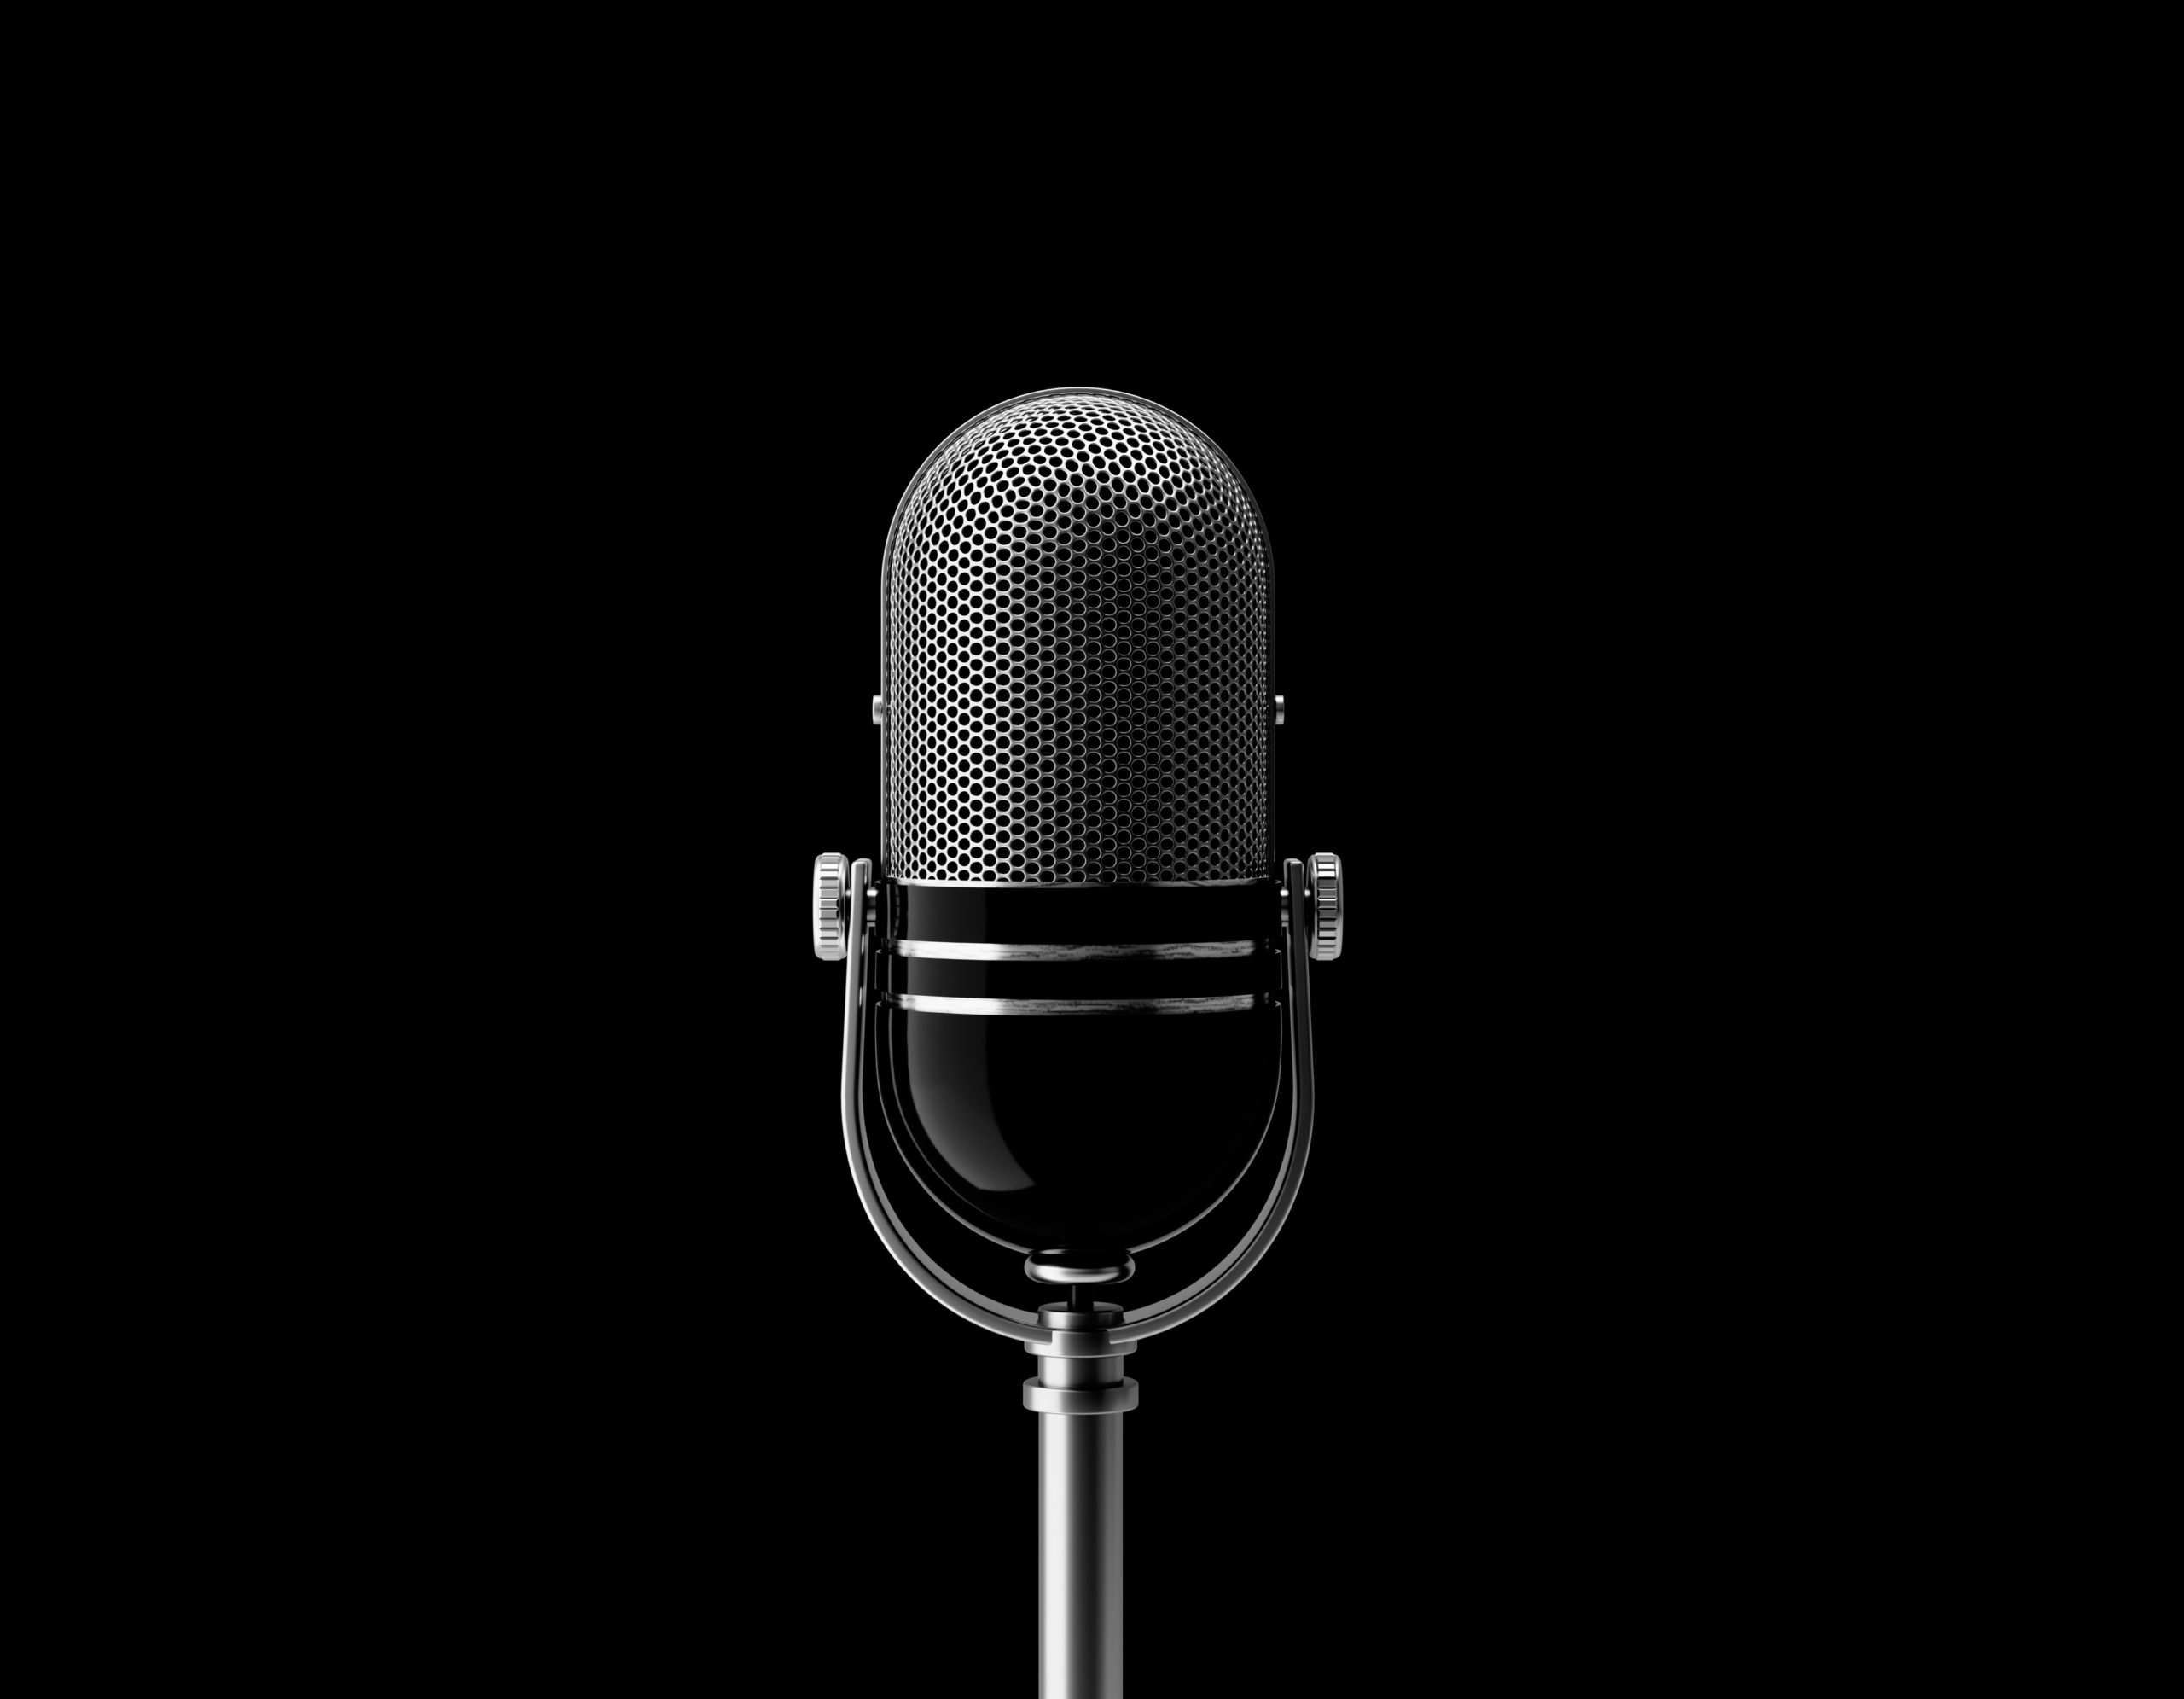 Microphone on black background. Horizontal composition with copy space. Clipping path is included.